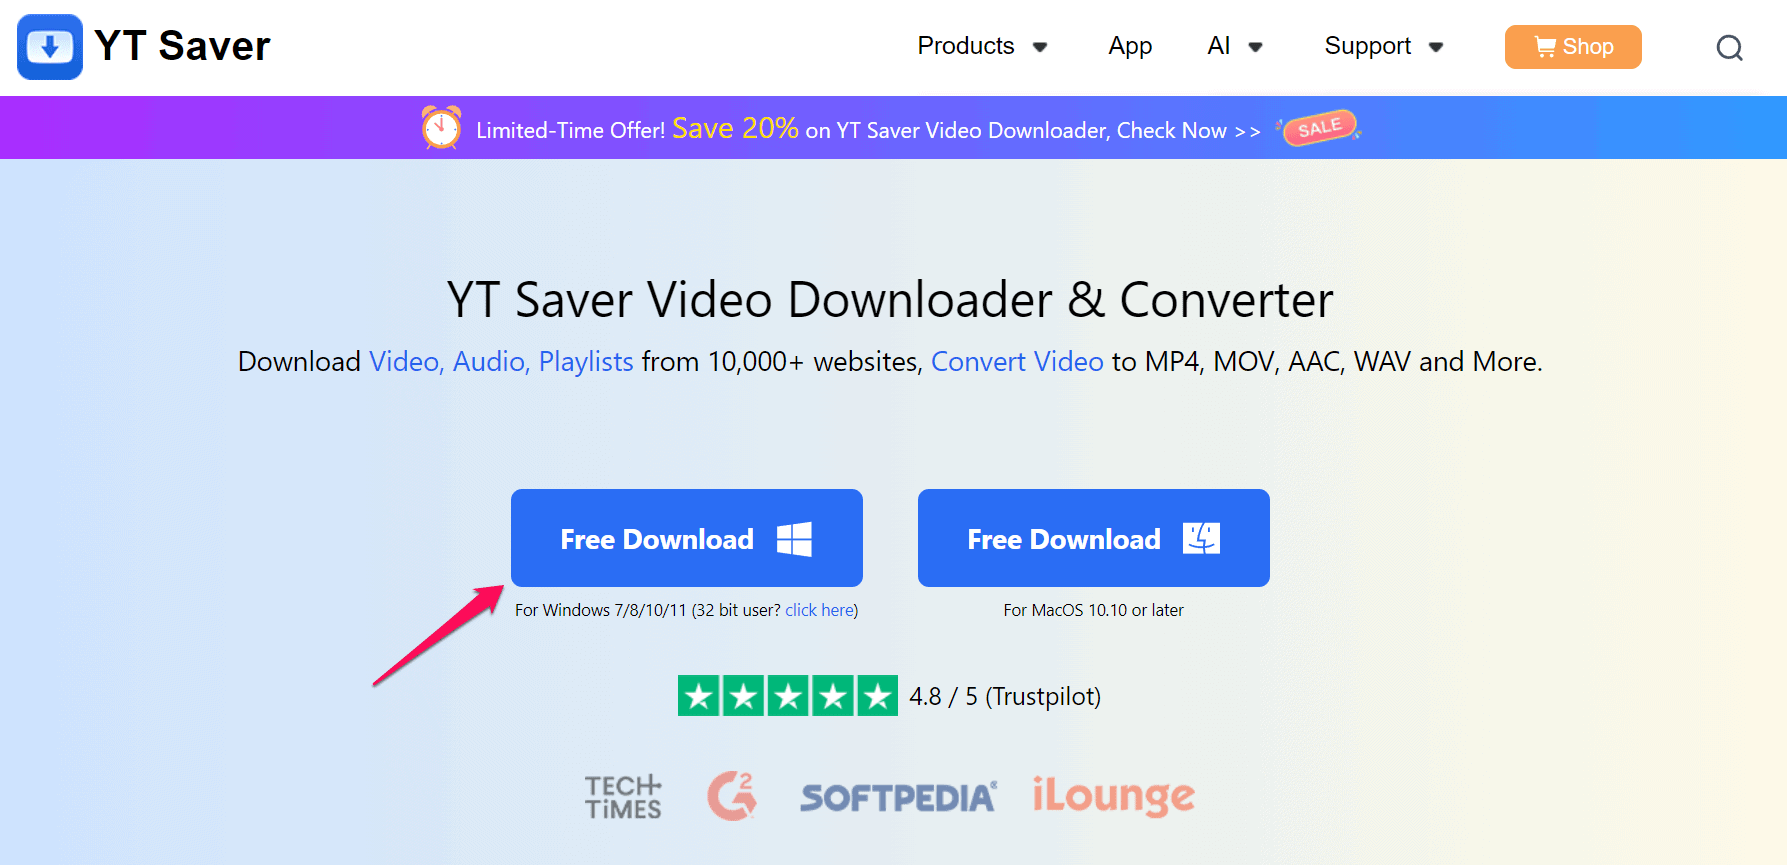 Downloading YT Saver from the homepage